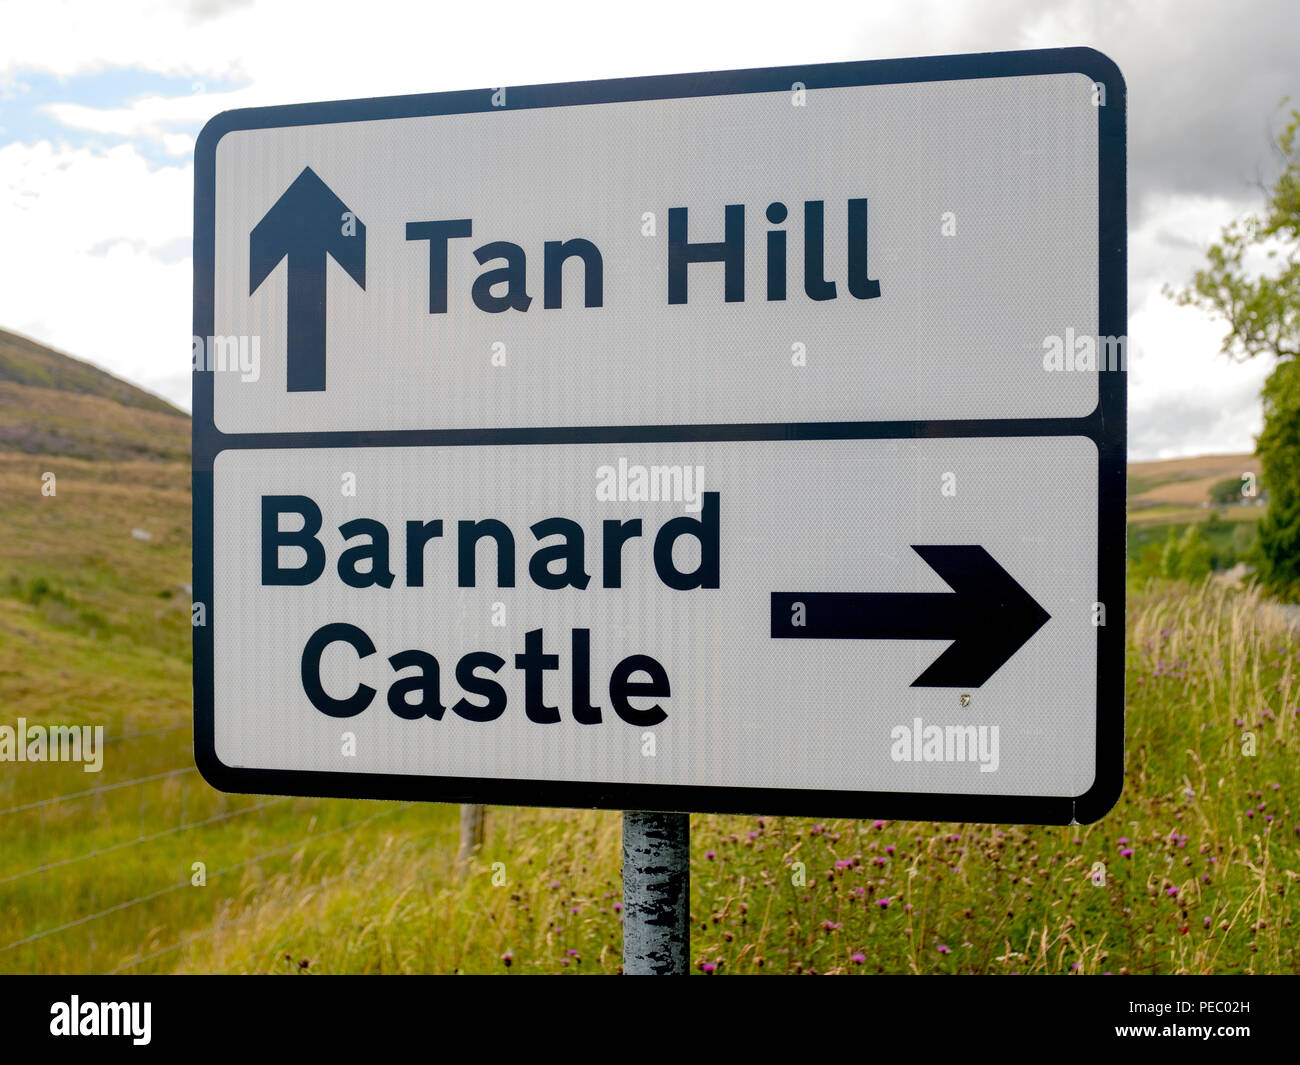 Black and white road sign for Tan Hill and Barnard Castle. Stock Photo